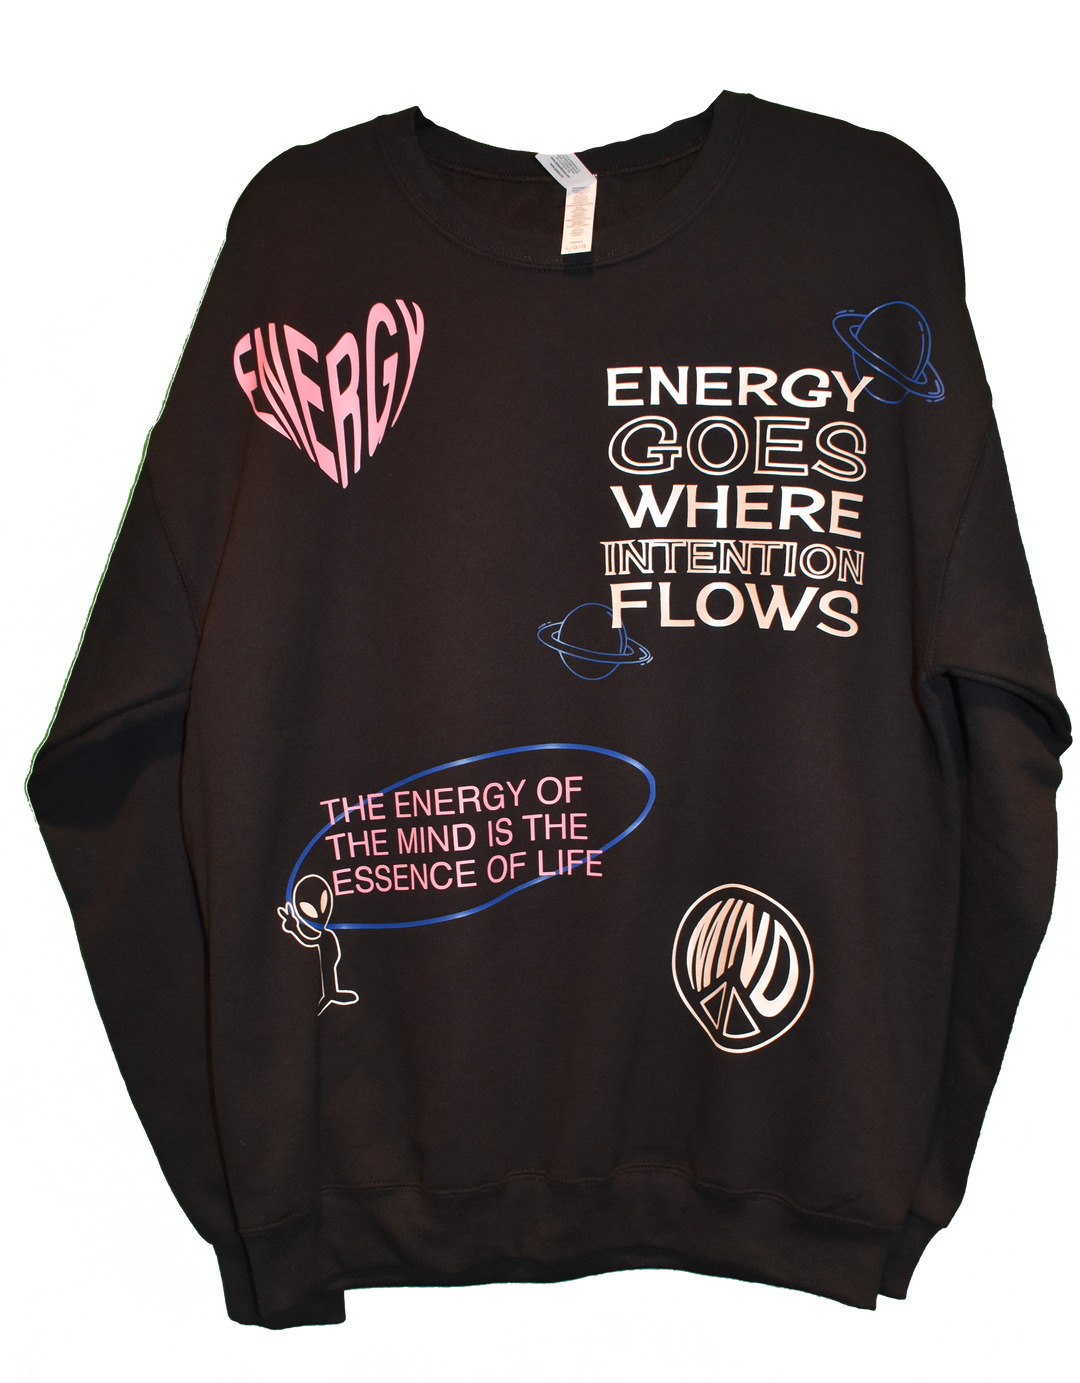 black energy crewneck sweatshirt. Energy goes where intention flows. The energy of the mind is the essence of life.